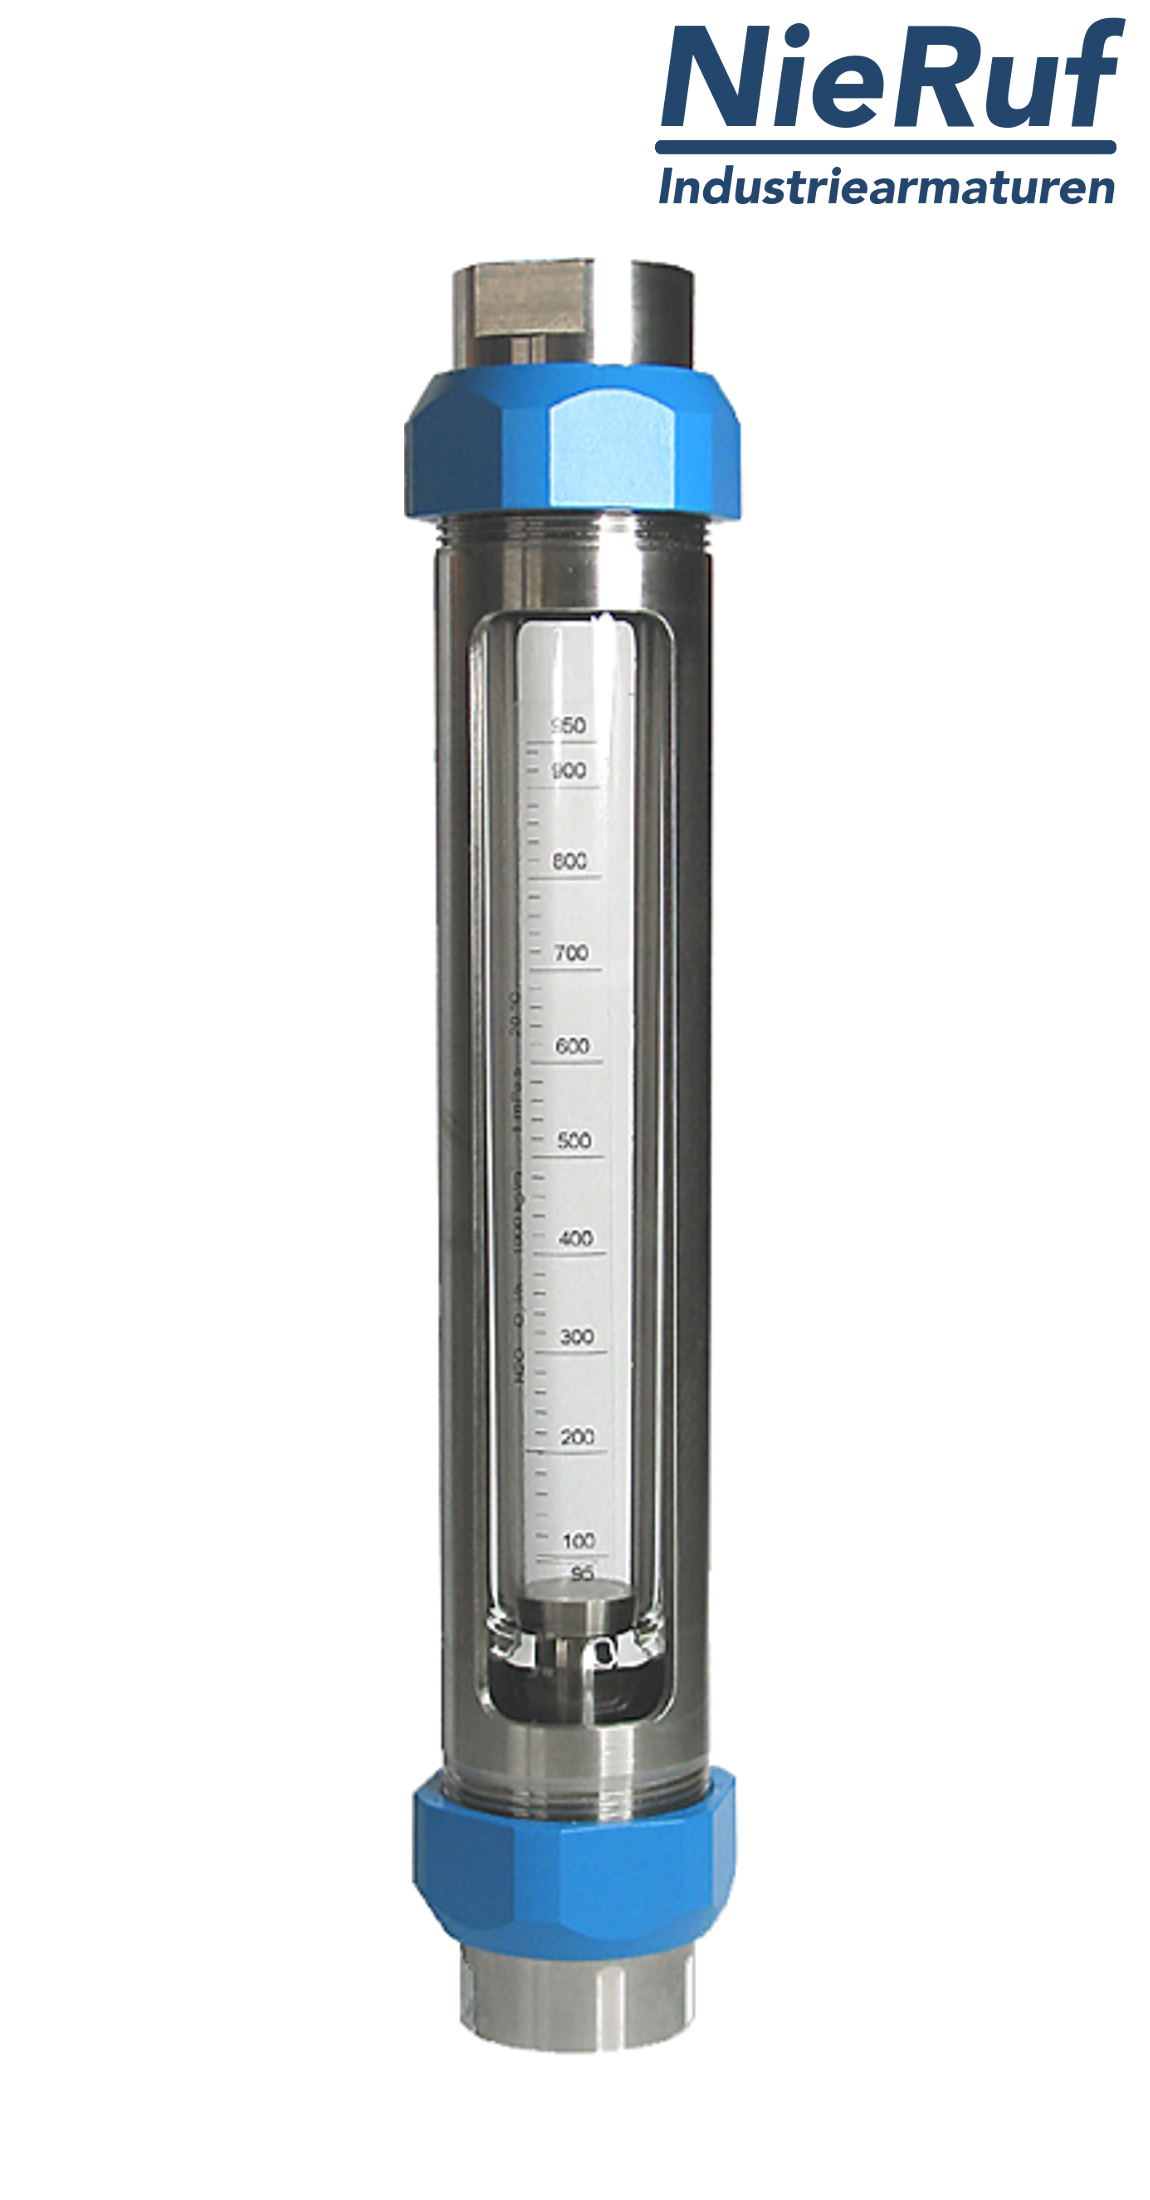 Variable area flowmeter stainless steel + borosilicate 1/2" inch 250.0 - 2500 l/h water EPDM